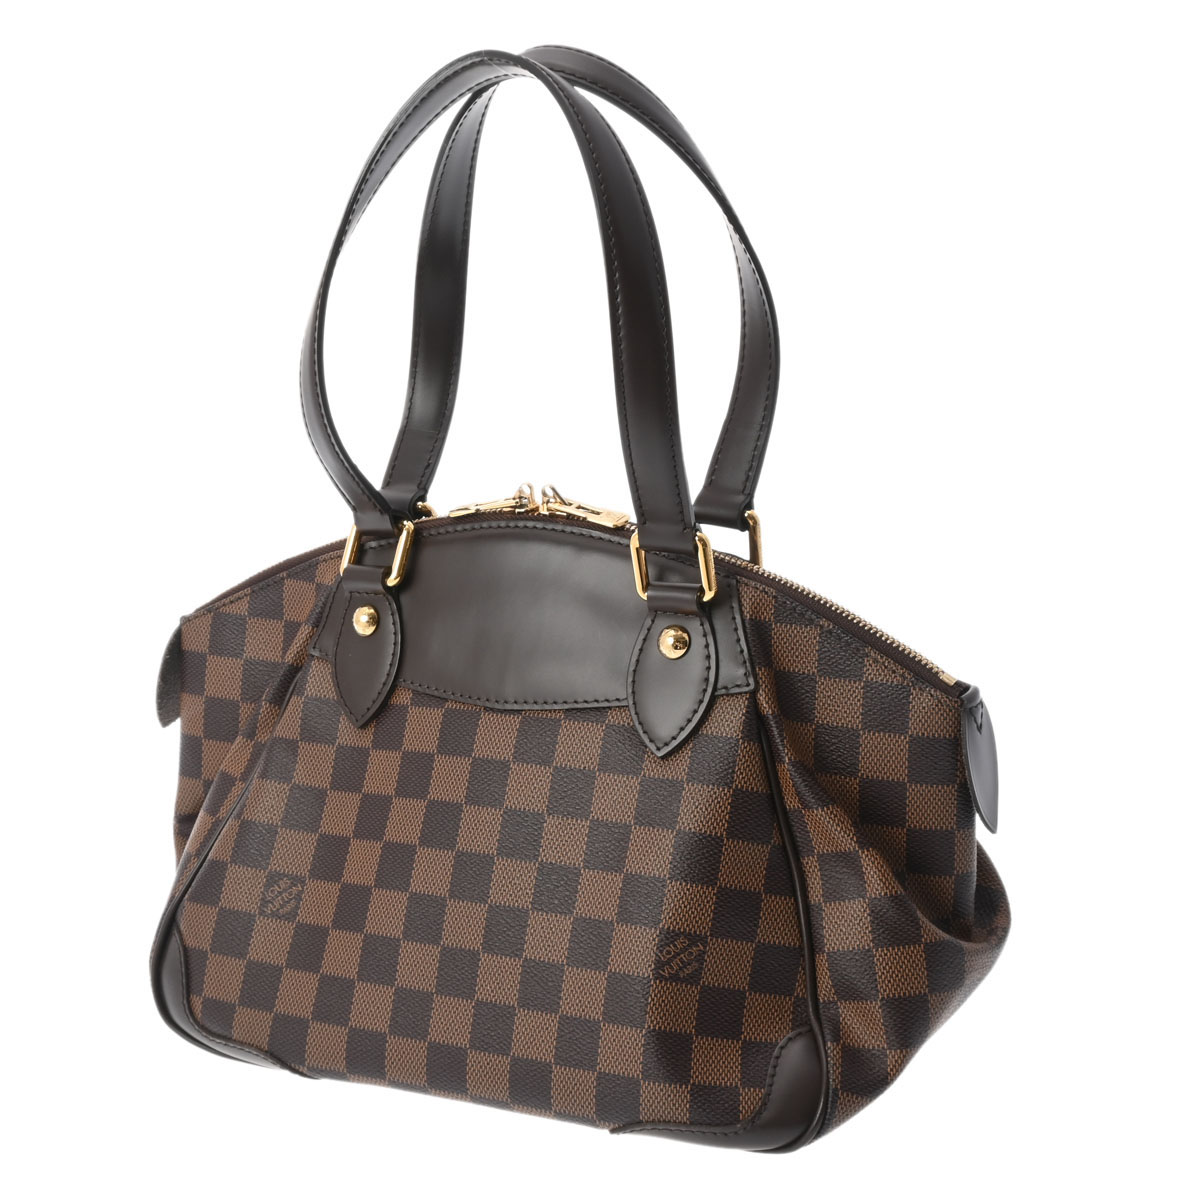 LOUIS VUITTON ルイヴィトン ダミエ ヴェローナPM ショルダーバッグ N41117 ブラウン by